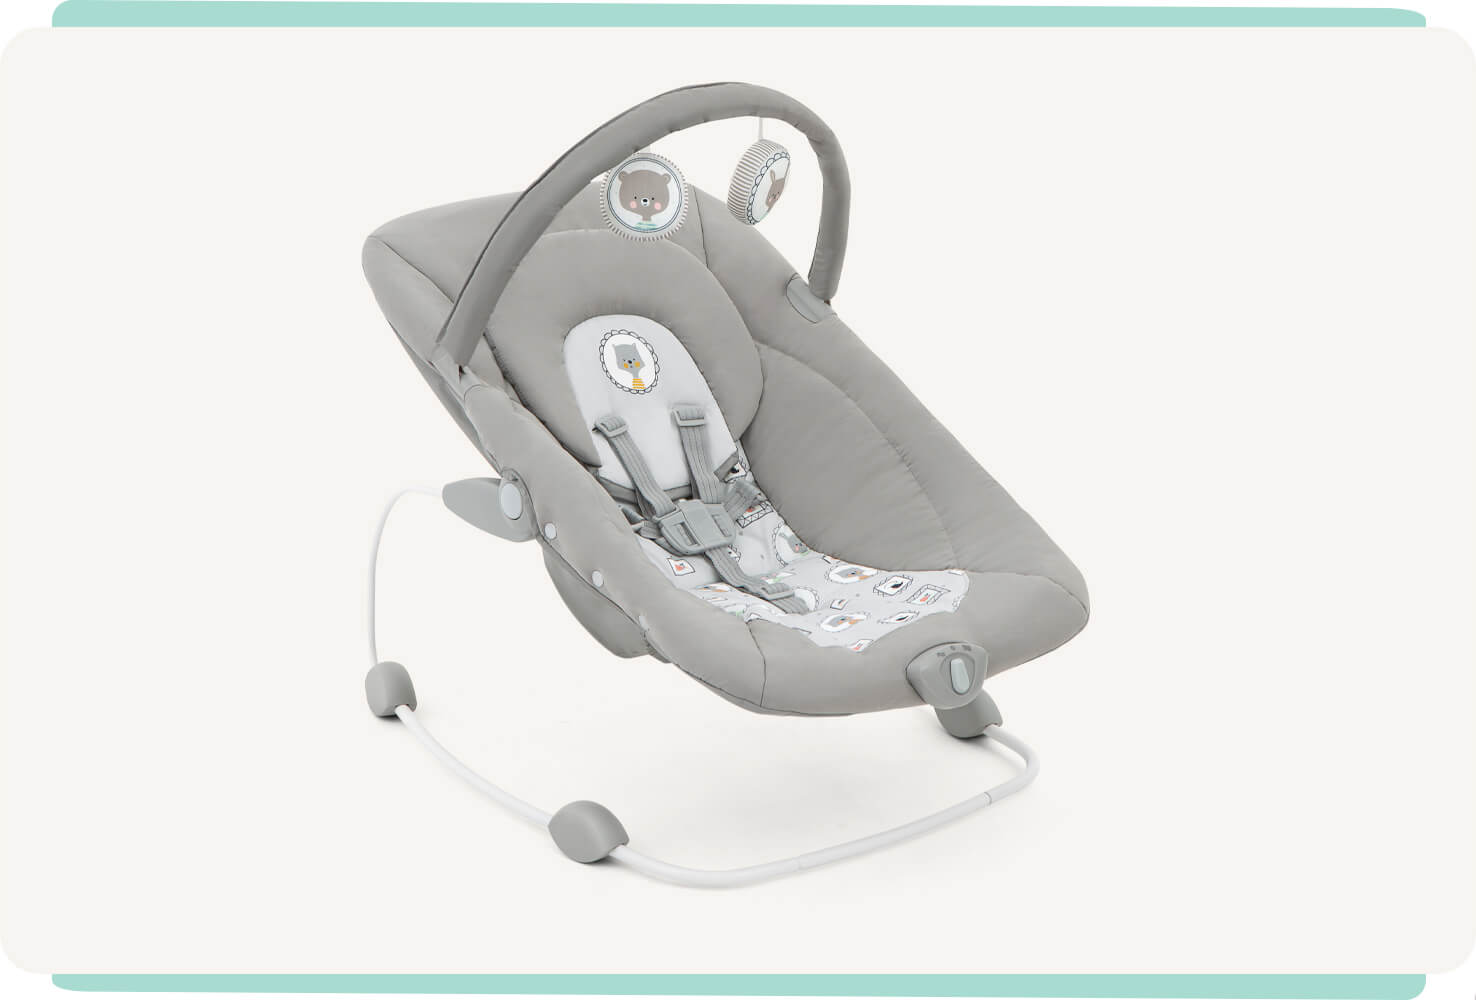   Joie light gray wish bouncer at a right angle.